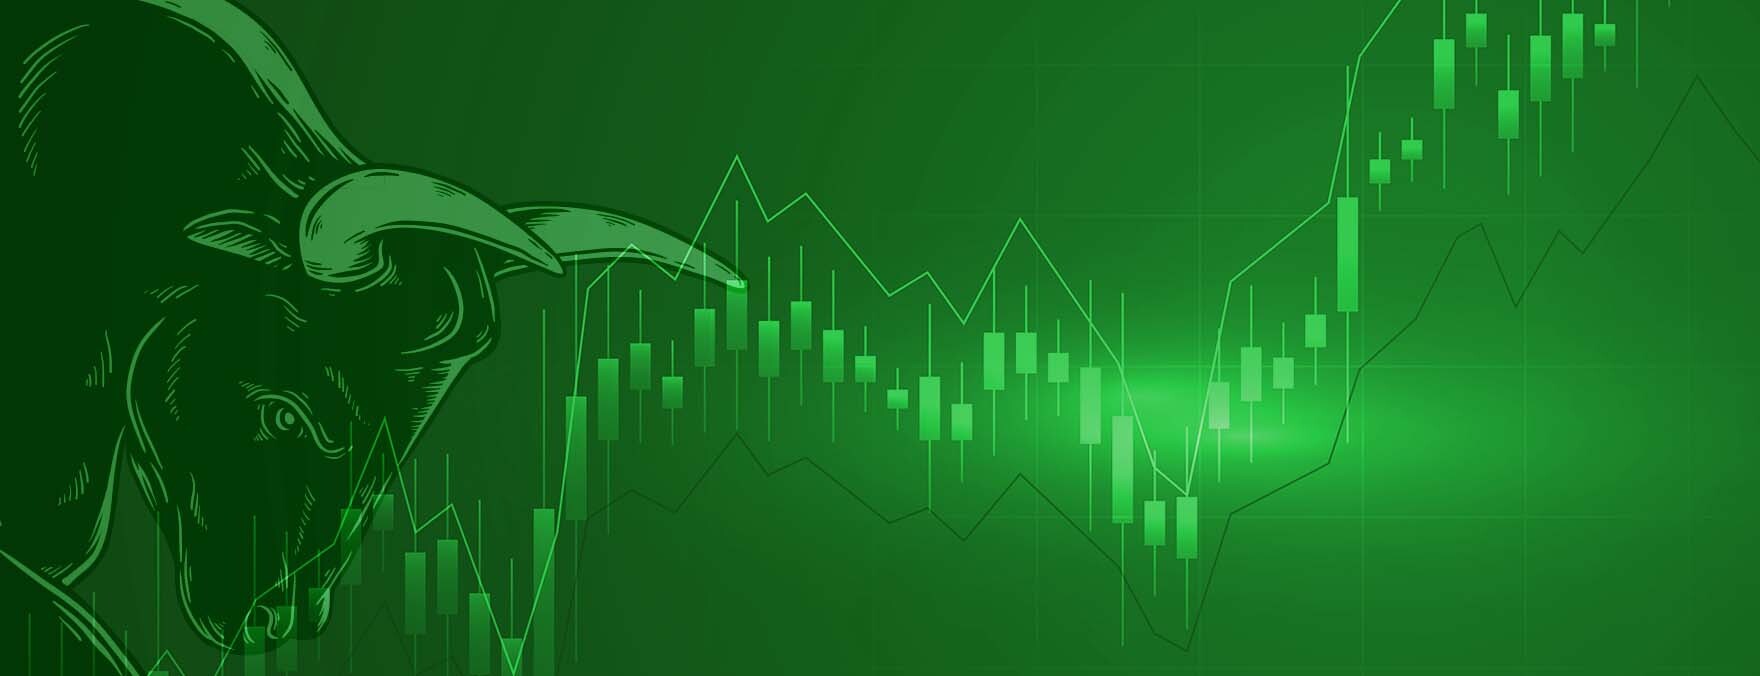 There is a green-shaded image with an upward candlestick chart and a bull on the left side of the image